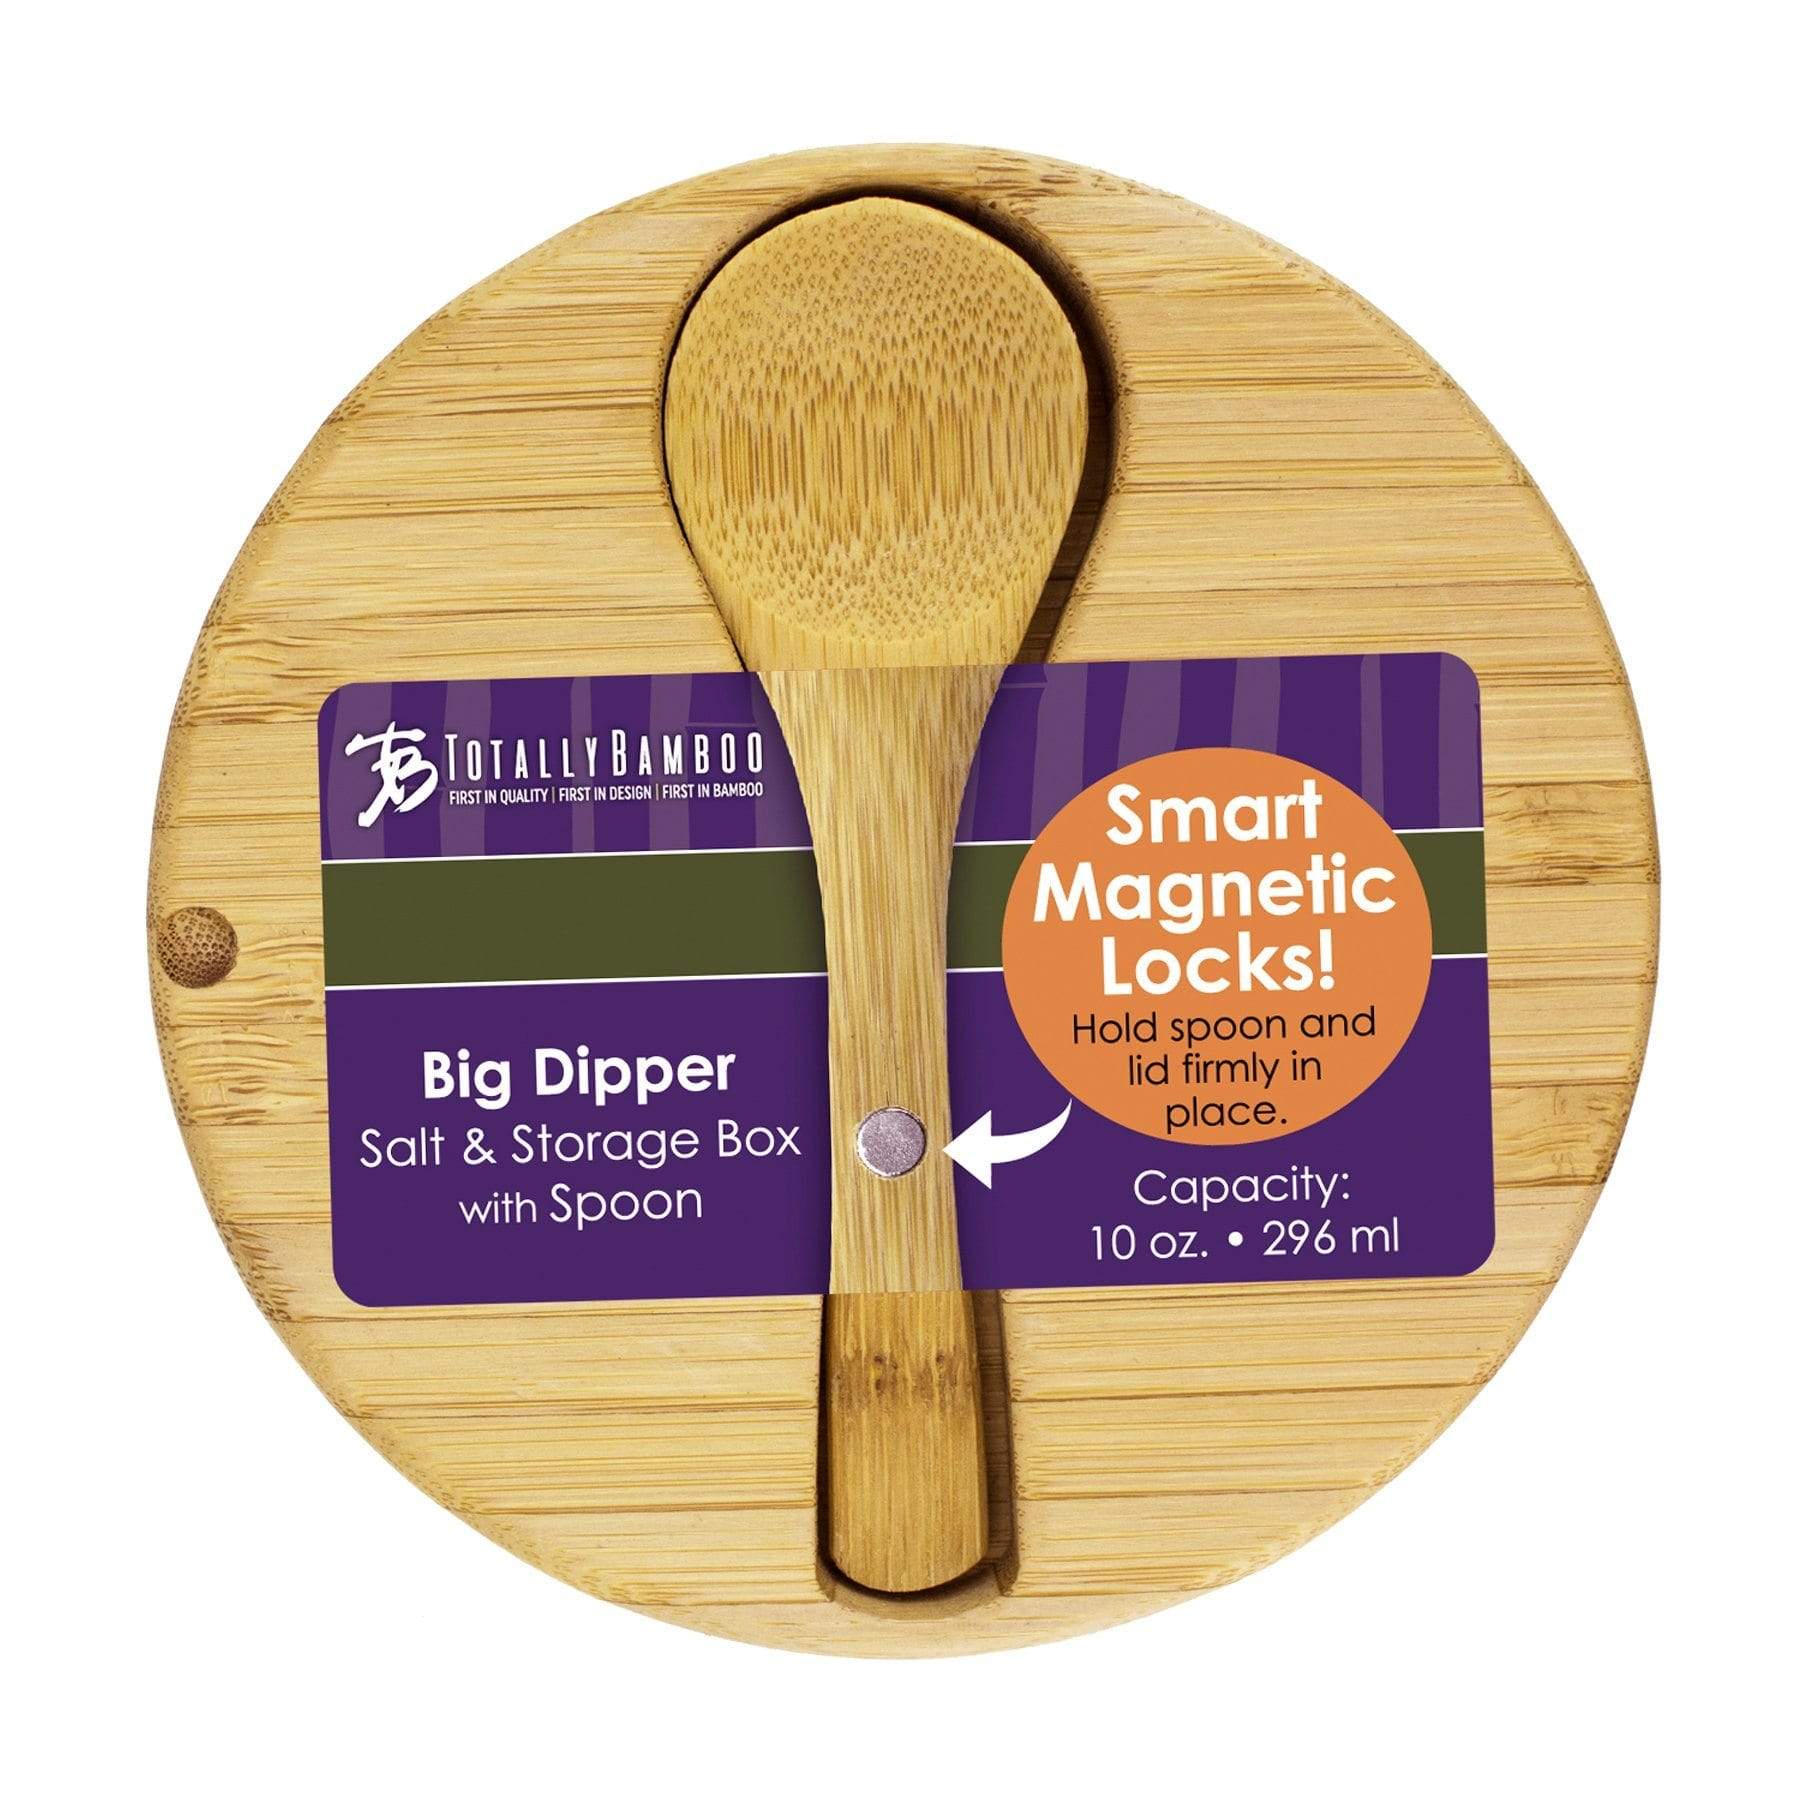 Totally Bamboo Big Dipper Bamboo Salt Box with Spoon, 10 Ounce Capacity